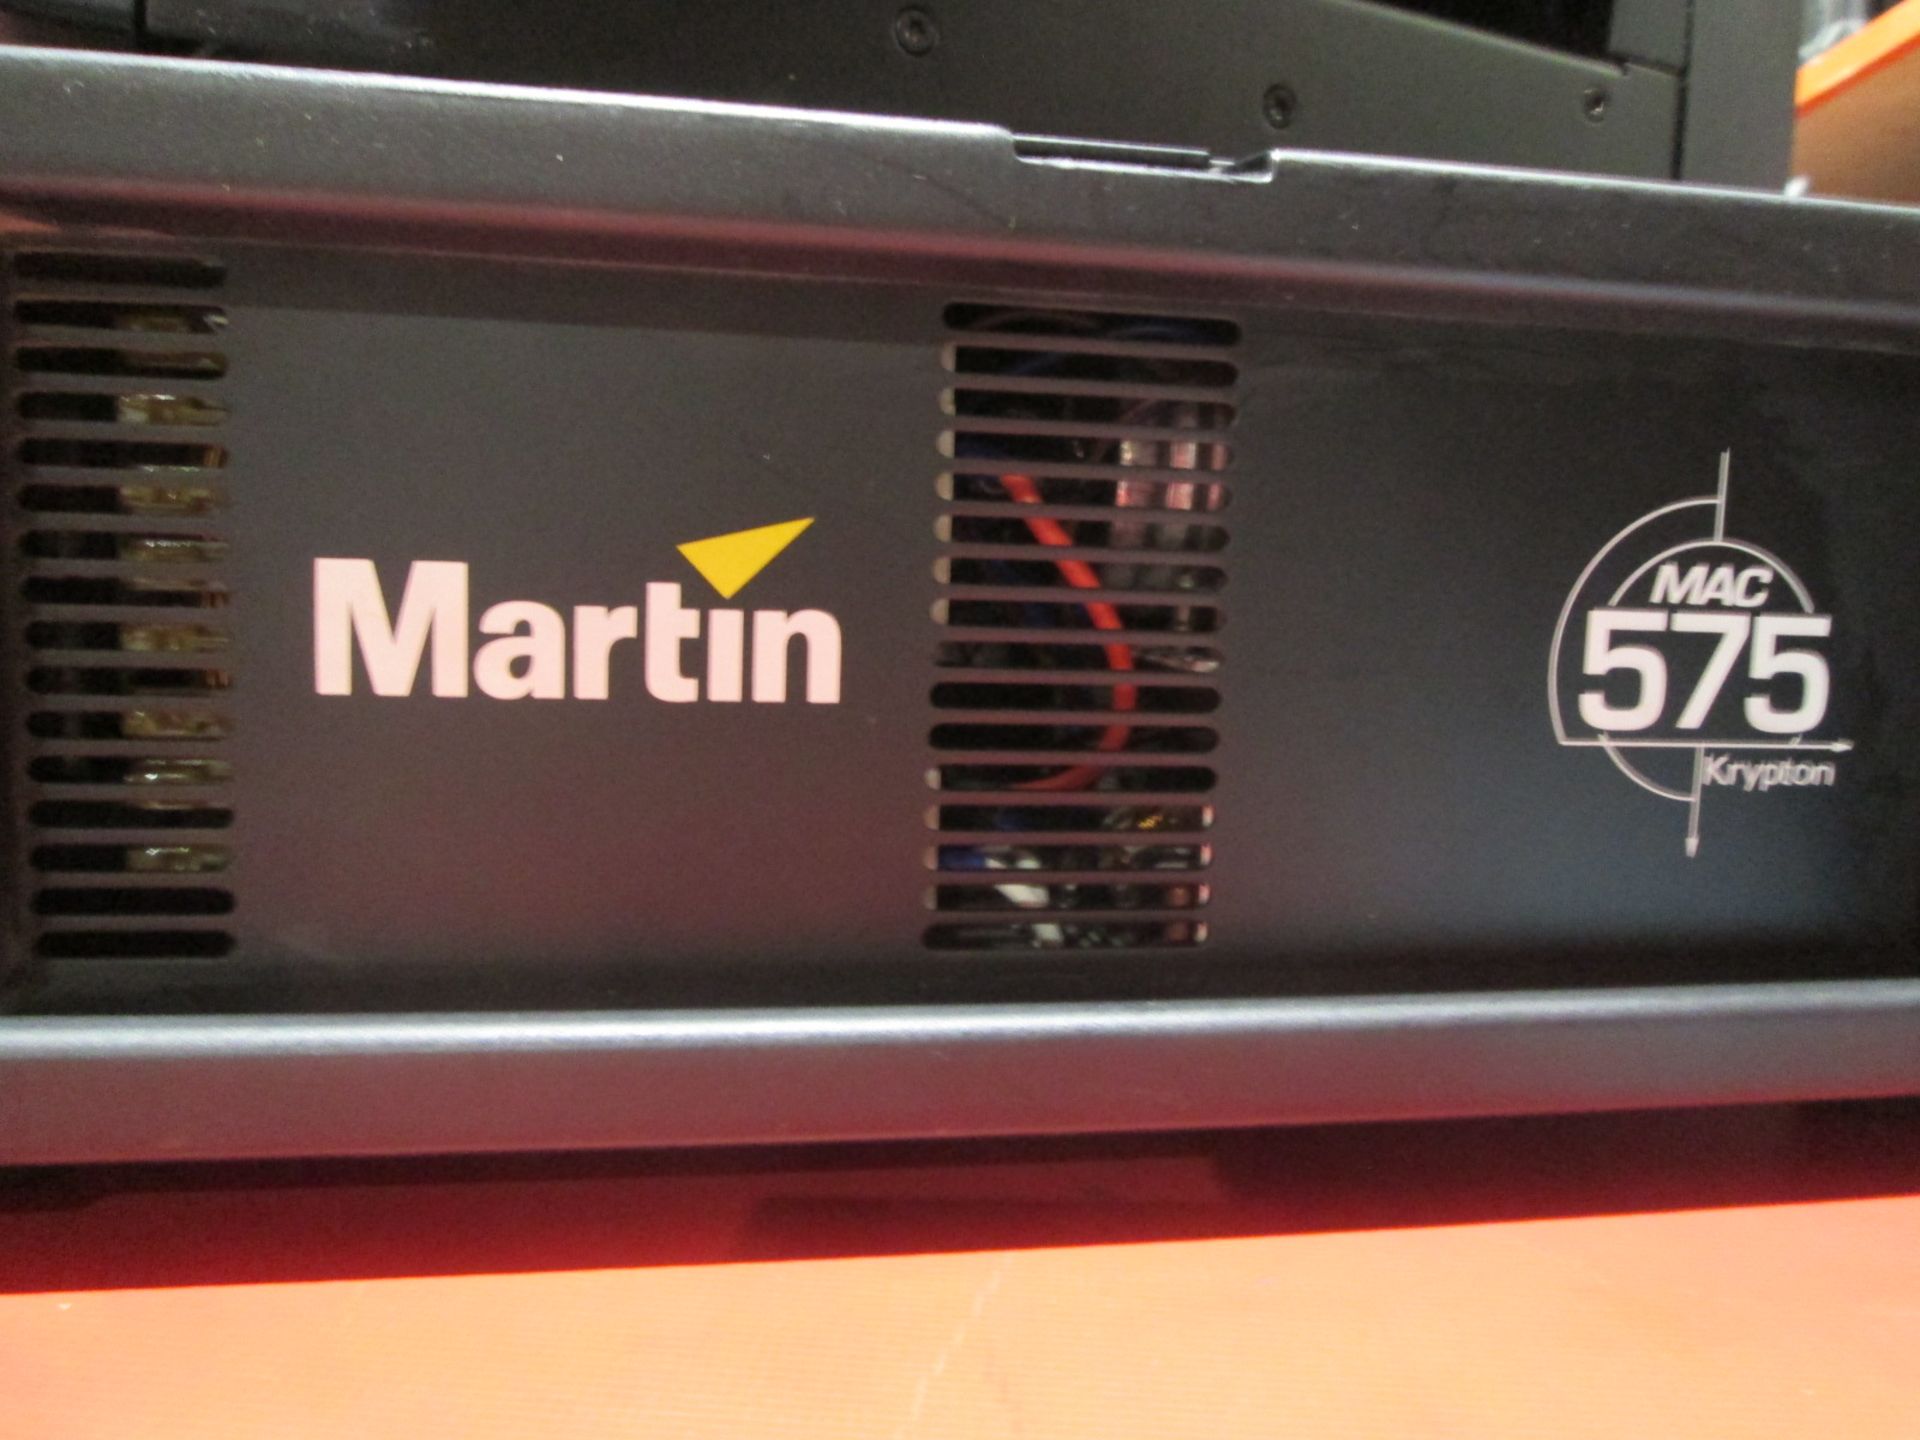 Martin MAC575 Kryton Moving Spot Light (Qty 2) In flight case with hanging brackets. S/N - Image 6 of 10